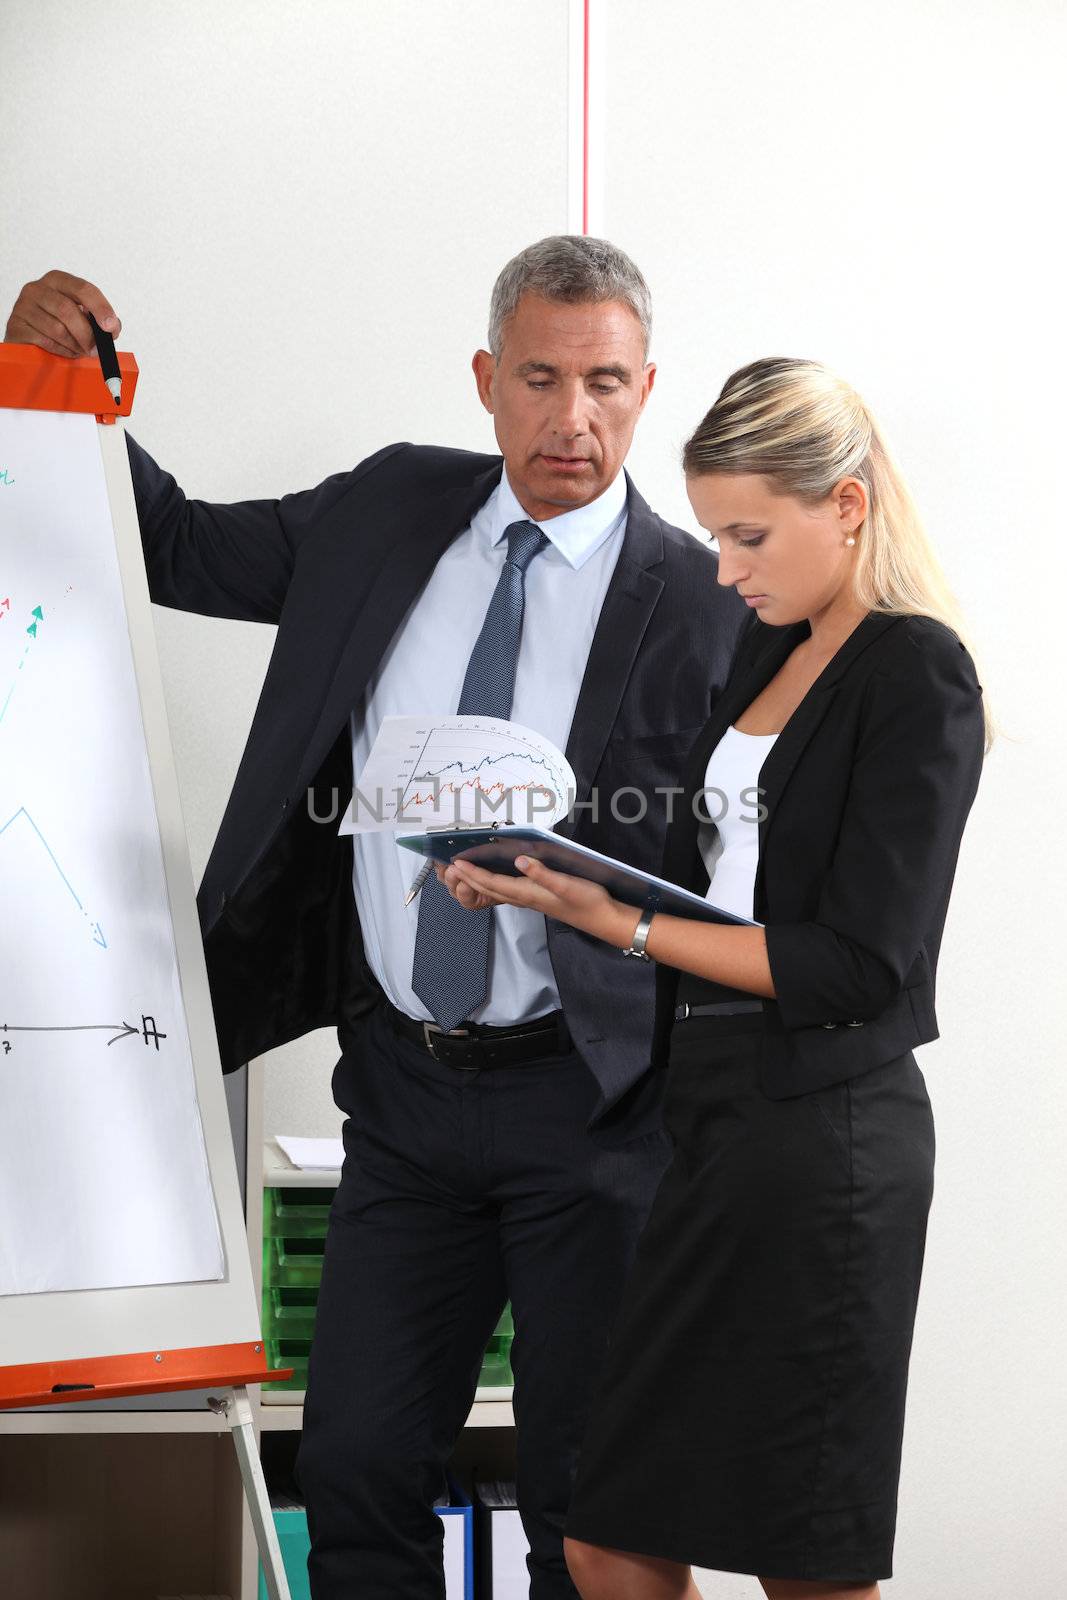 A team of business professionals reviewing their data before a presentation